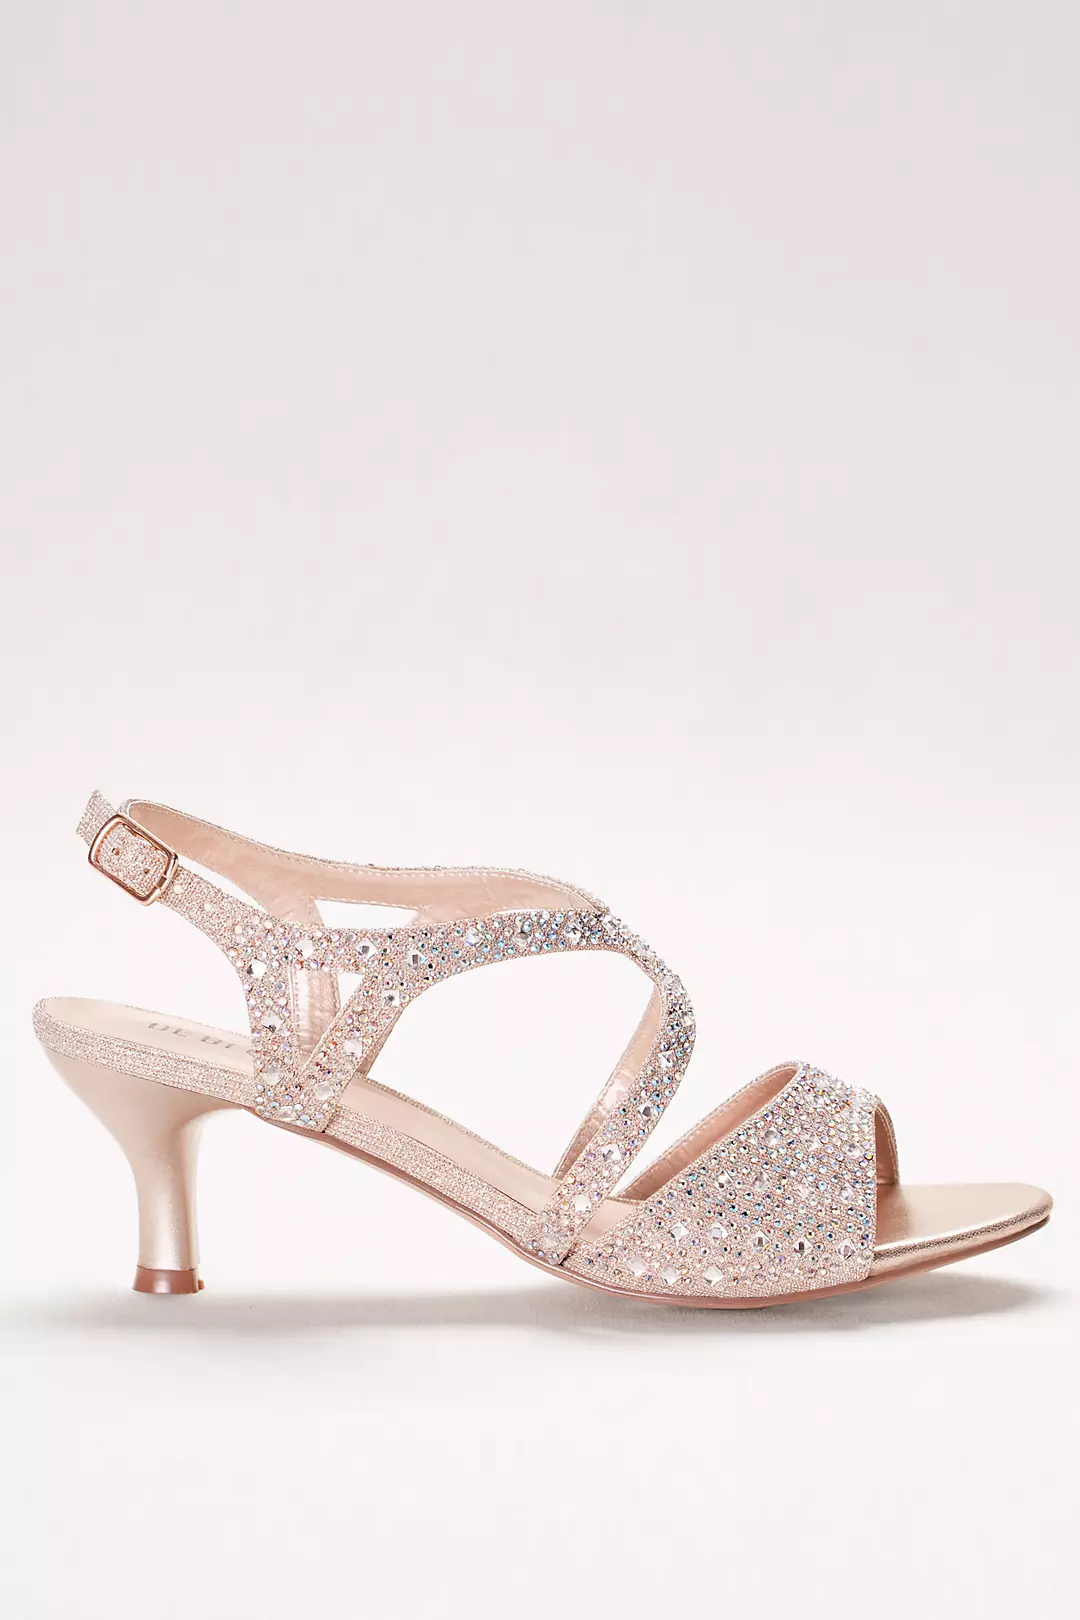 Strappy Heels with Iridescent Gems Image 3